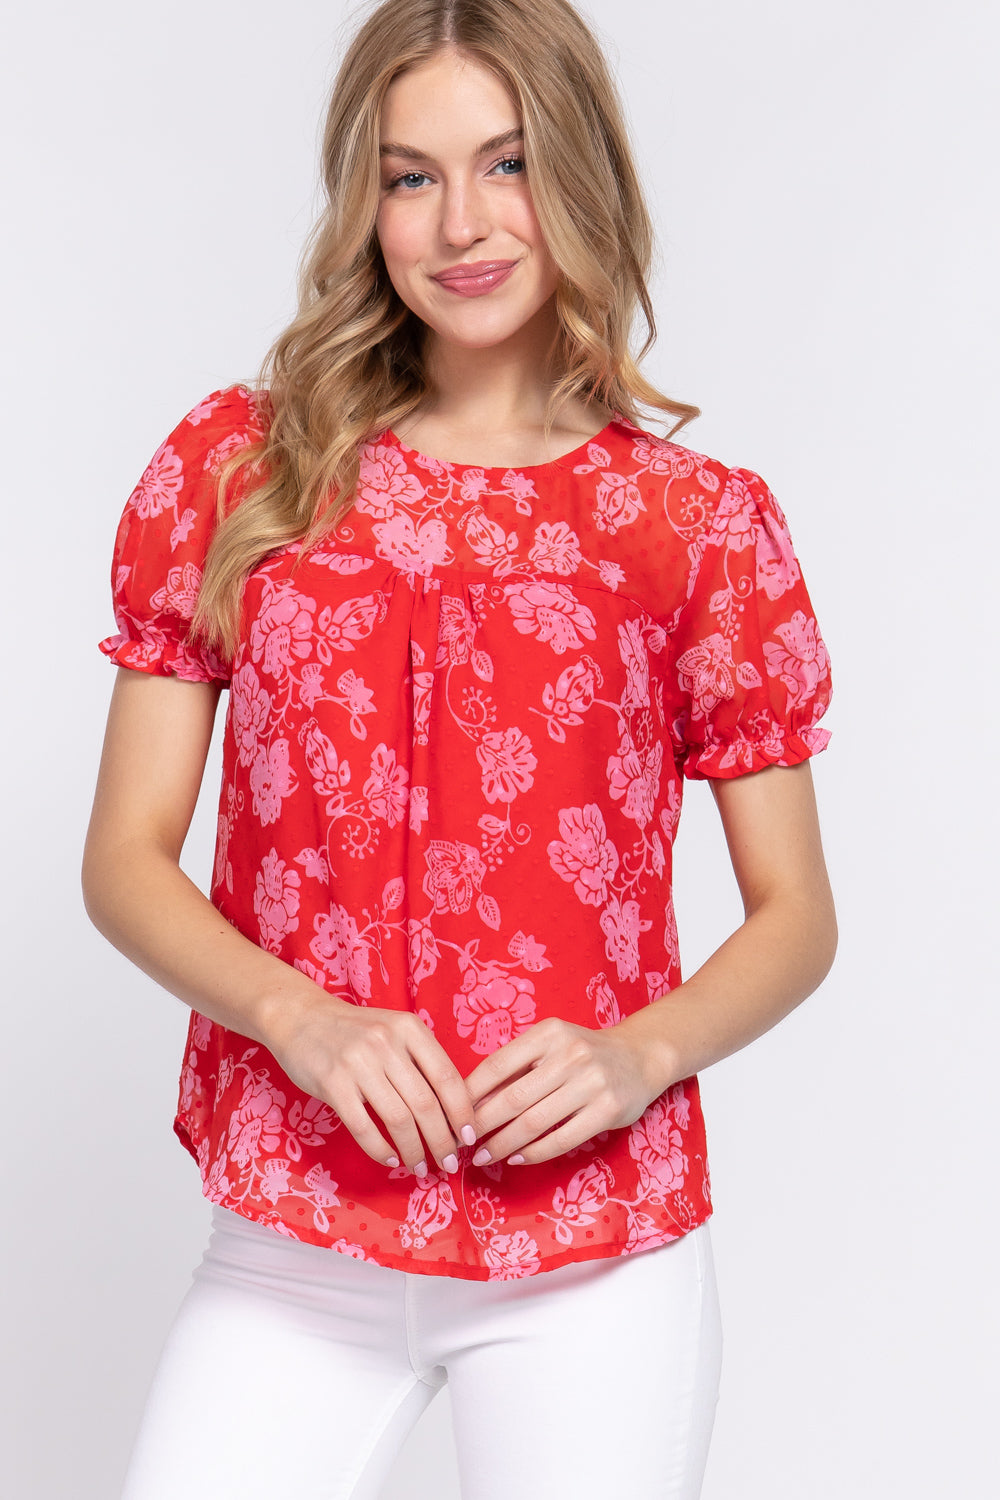 RED Short Slv Print Clip Dot Blouse - 2 colors - Ships from The US - women's blouse at TFC&H Co.